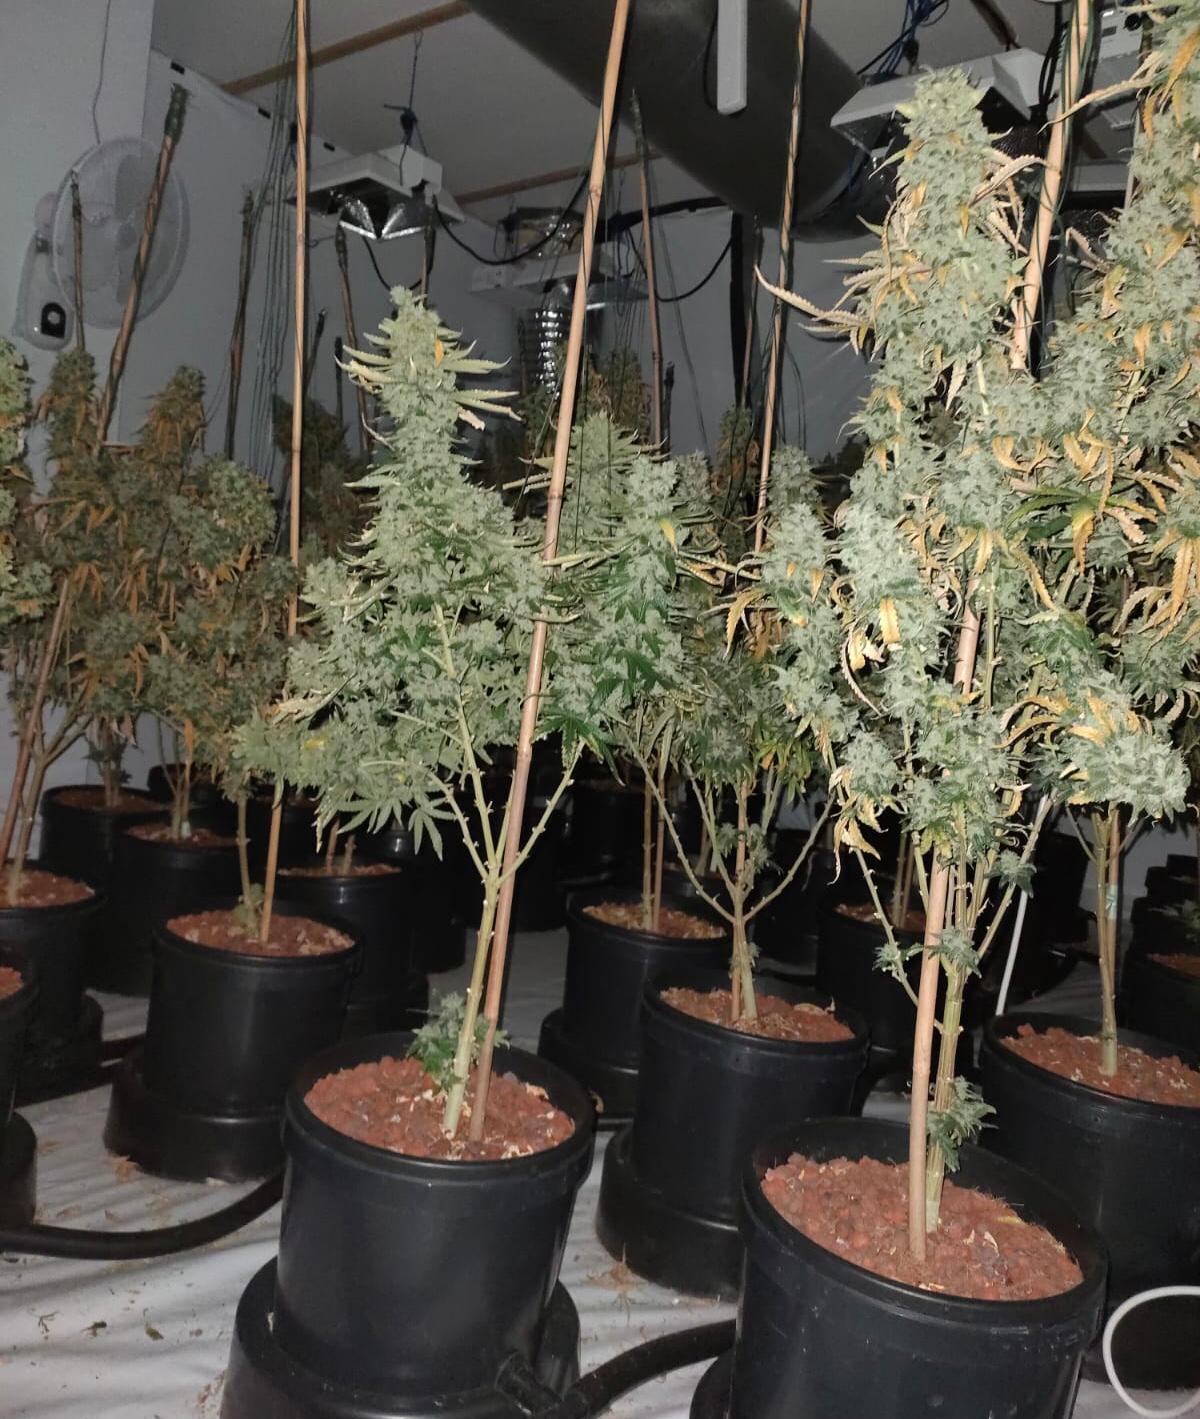 £60,000 worth of drugs seized from Omagh ‘cannabis factory’